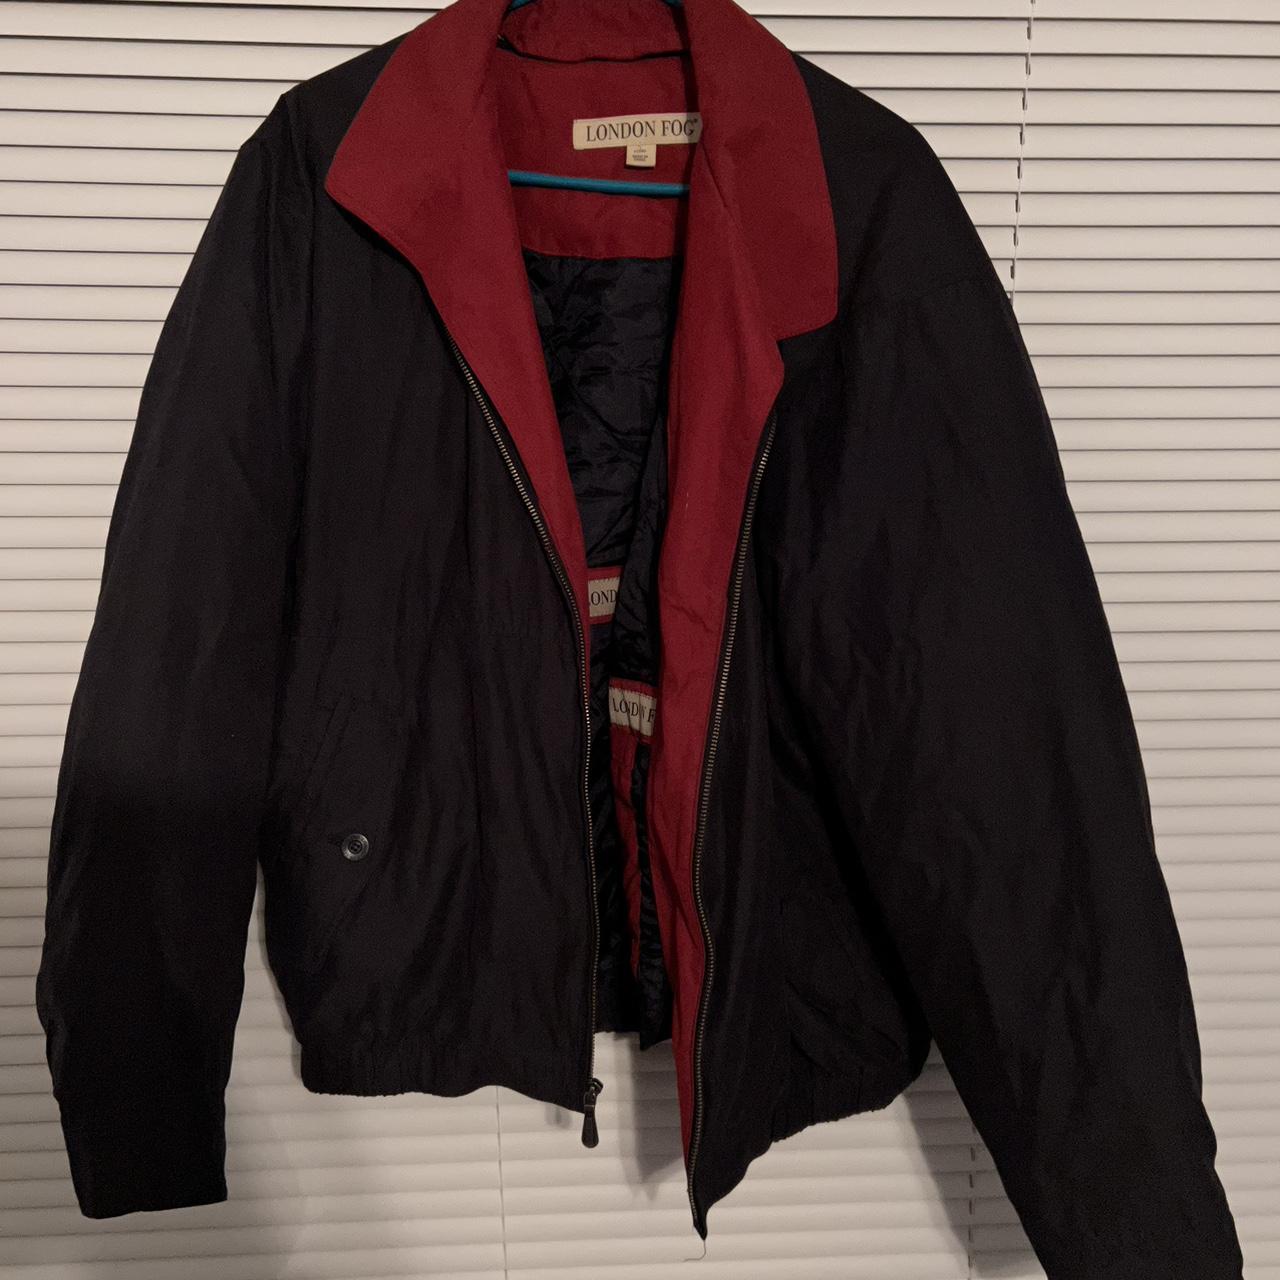 London Fog Men's Navy and Red Jacket